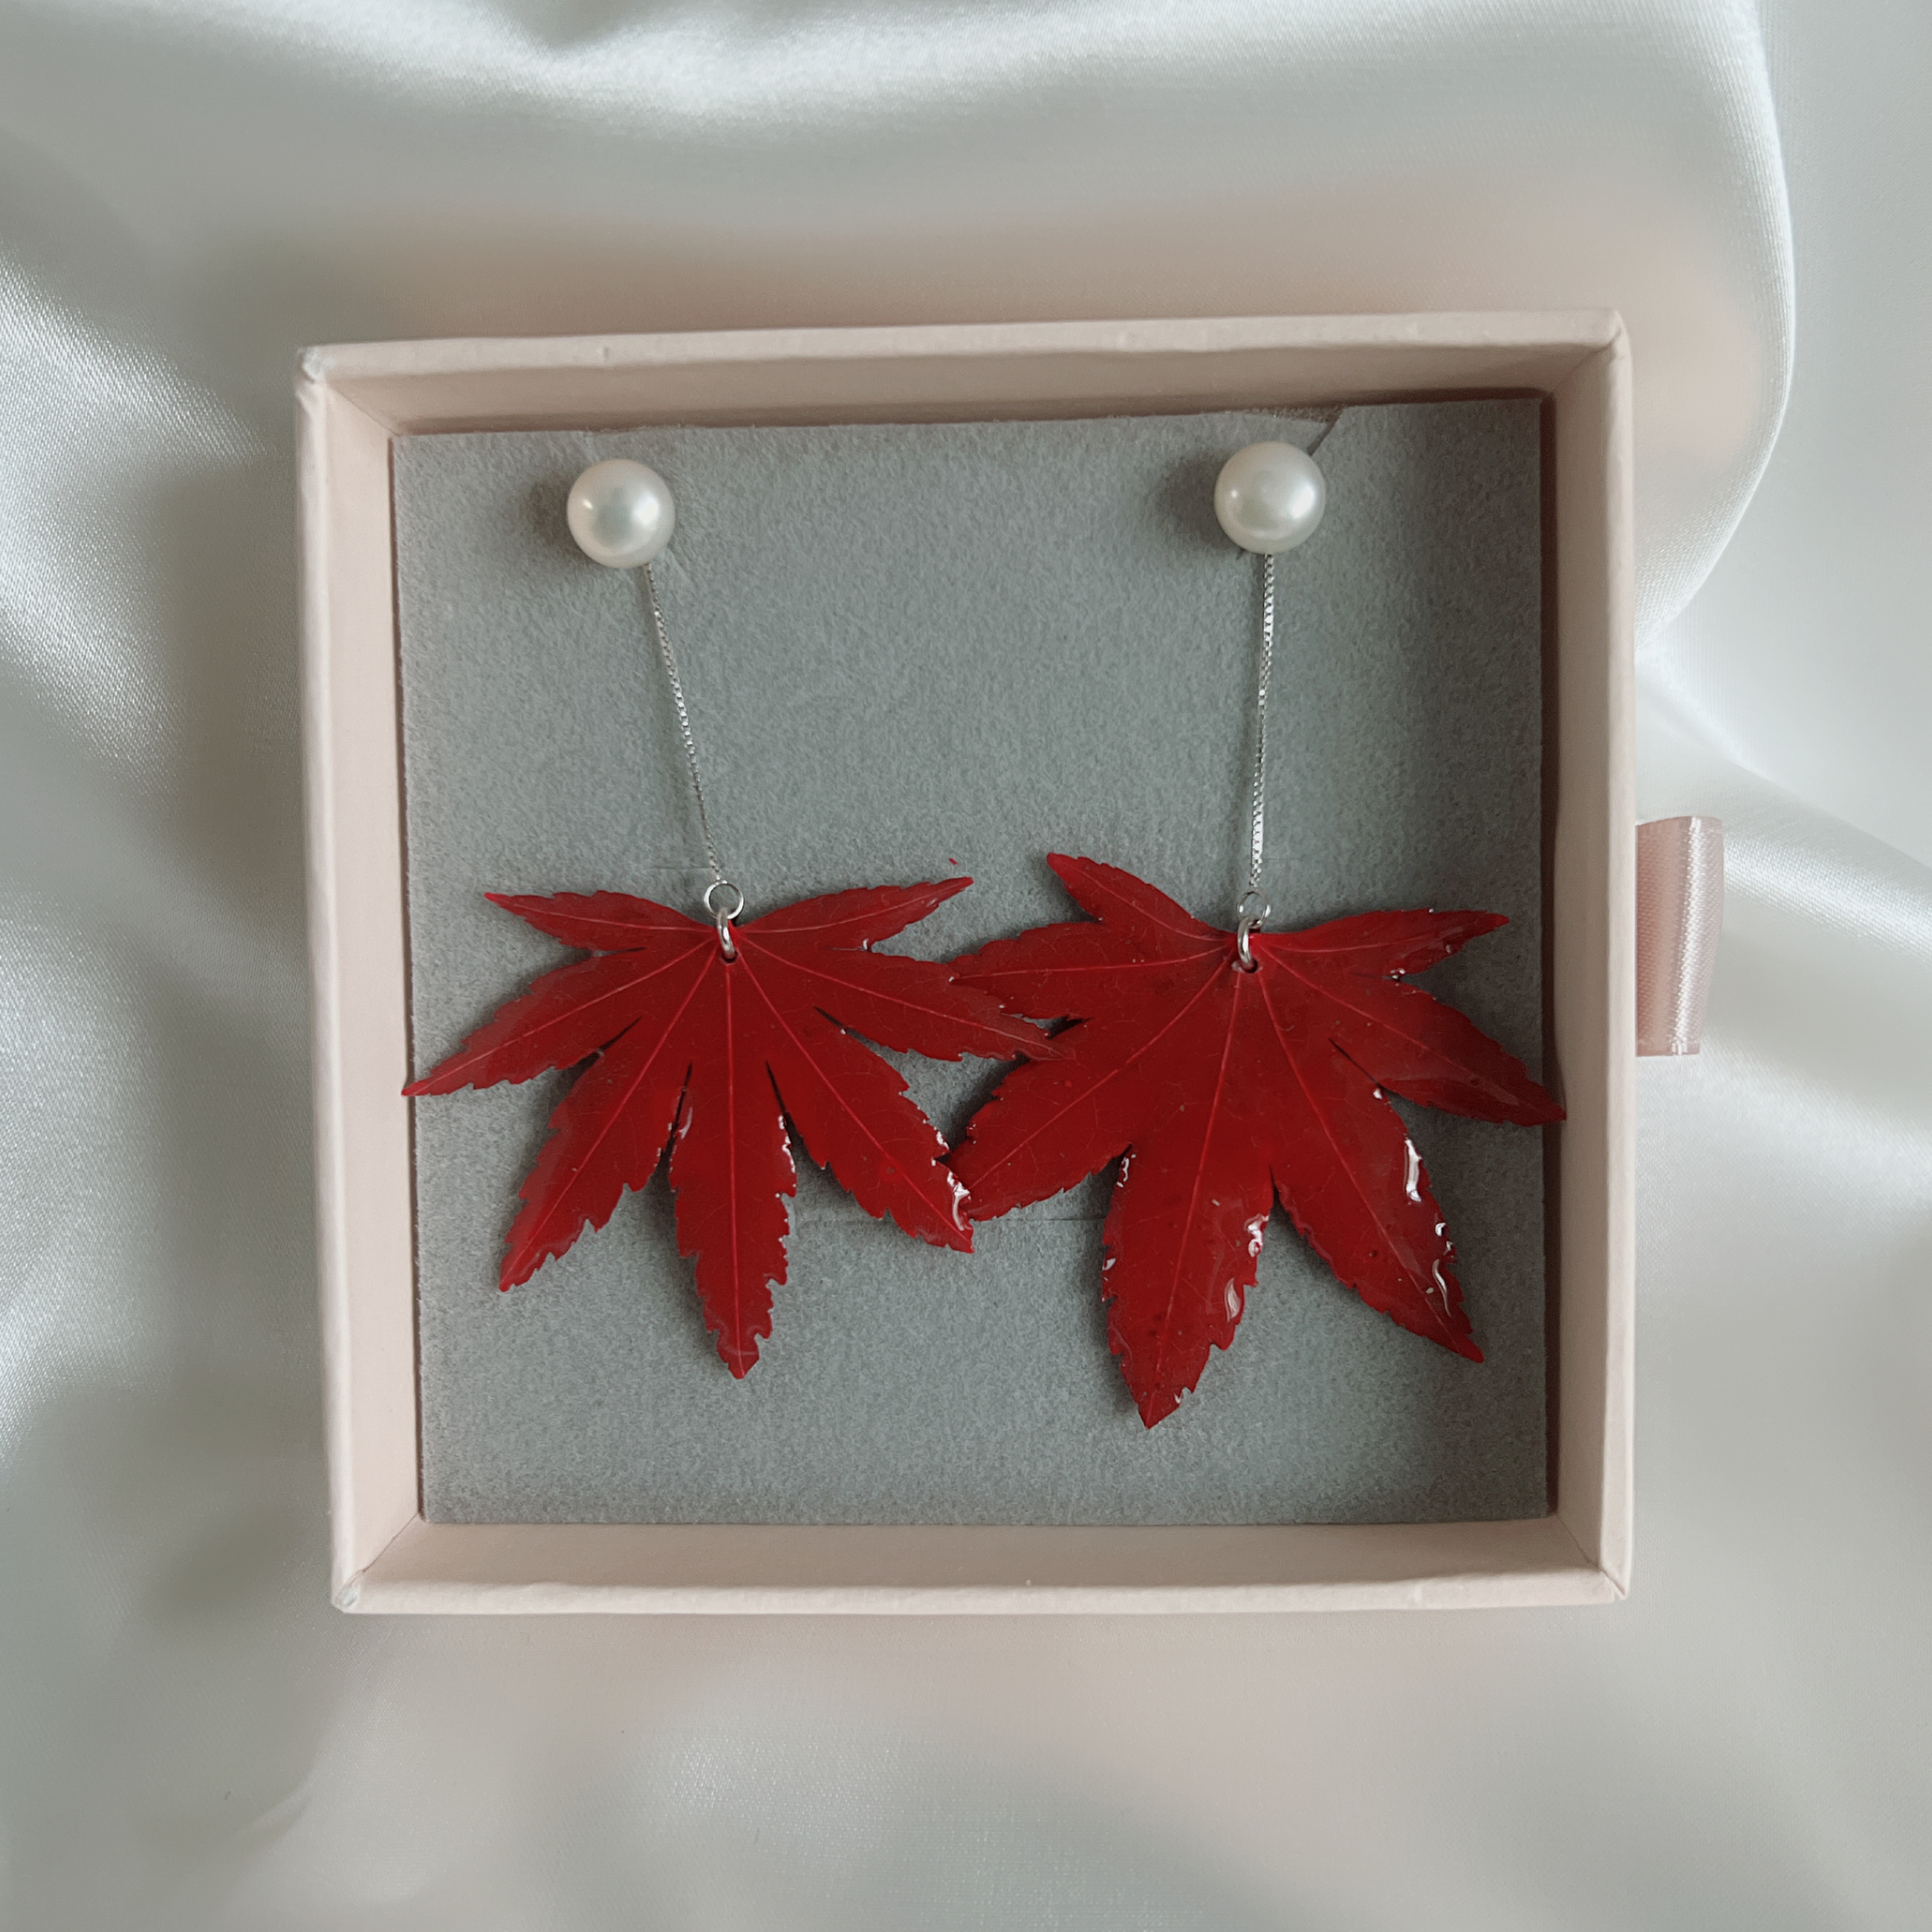 Maple Large Button Pearl 2 IN 1 Sterling Silver Drop Earrings| Real Dried maple leaves| Removable Chains